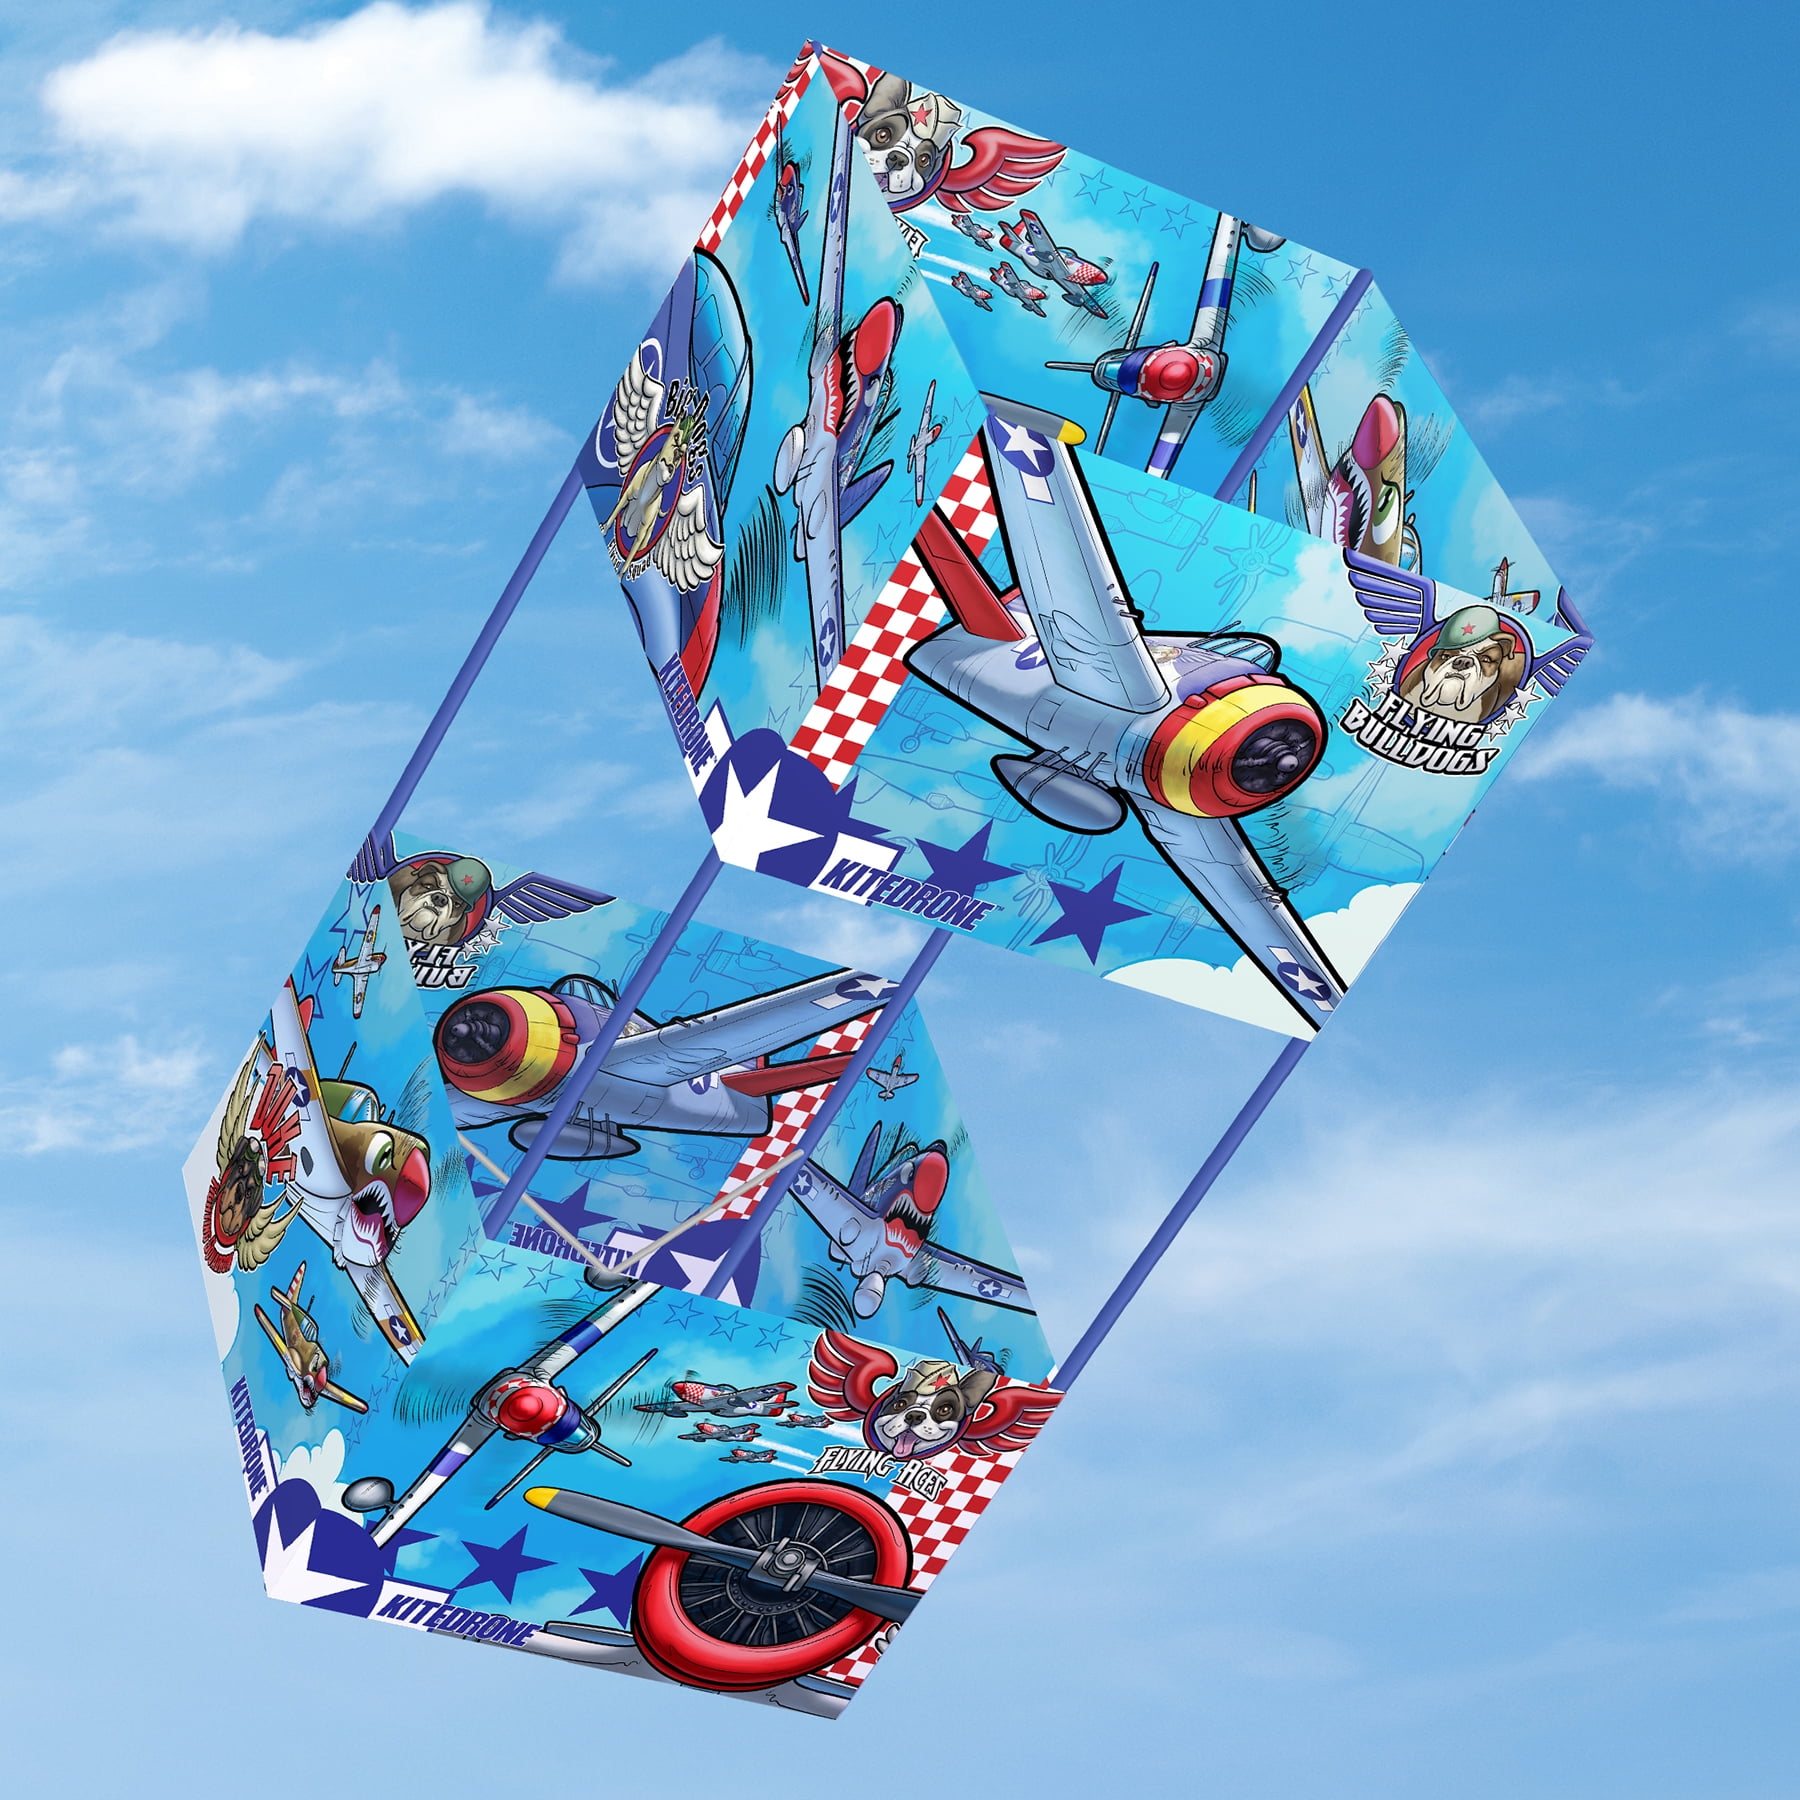 KITEDRONE Deltawing Performance Kite Toy for Kids - LOL Surprise